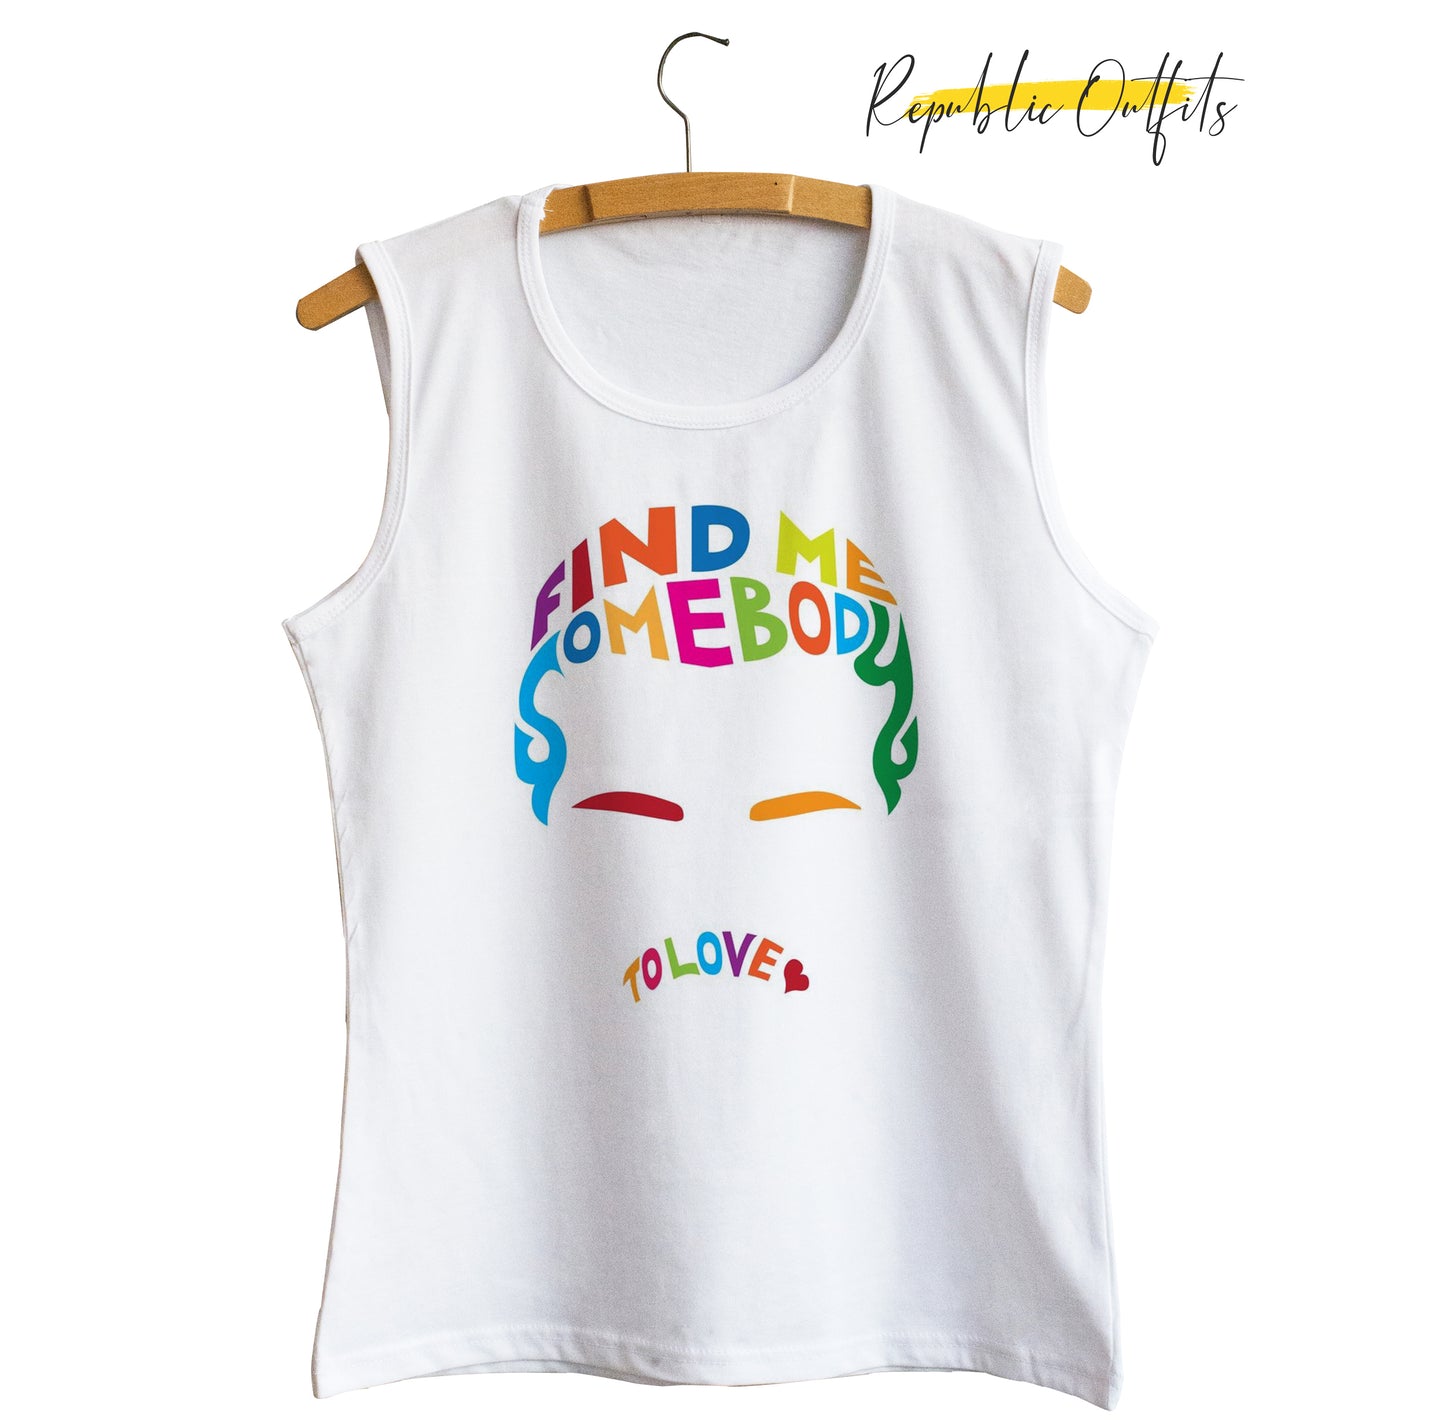 Somebody to love Tee